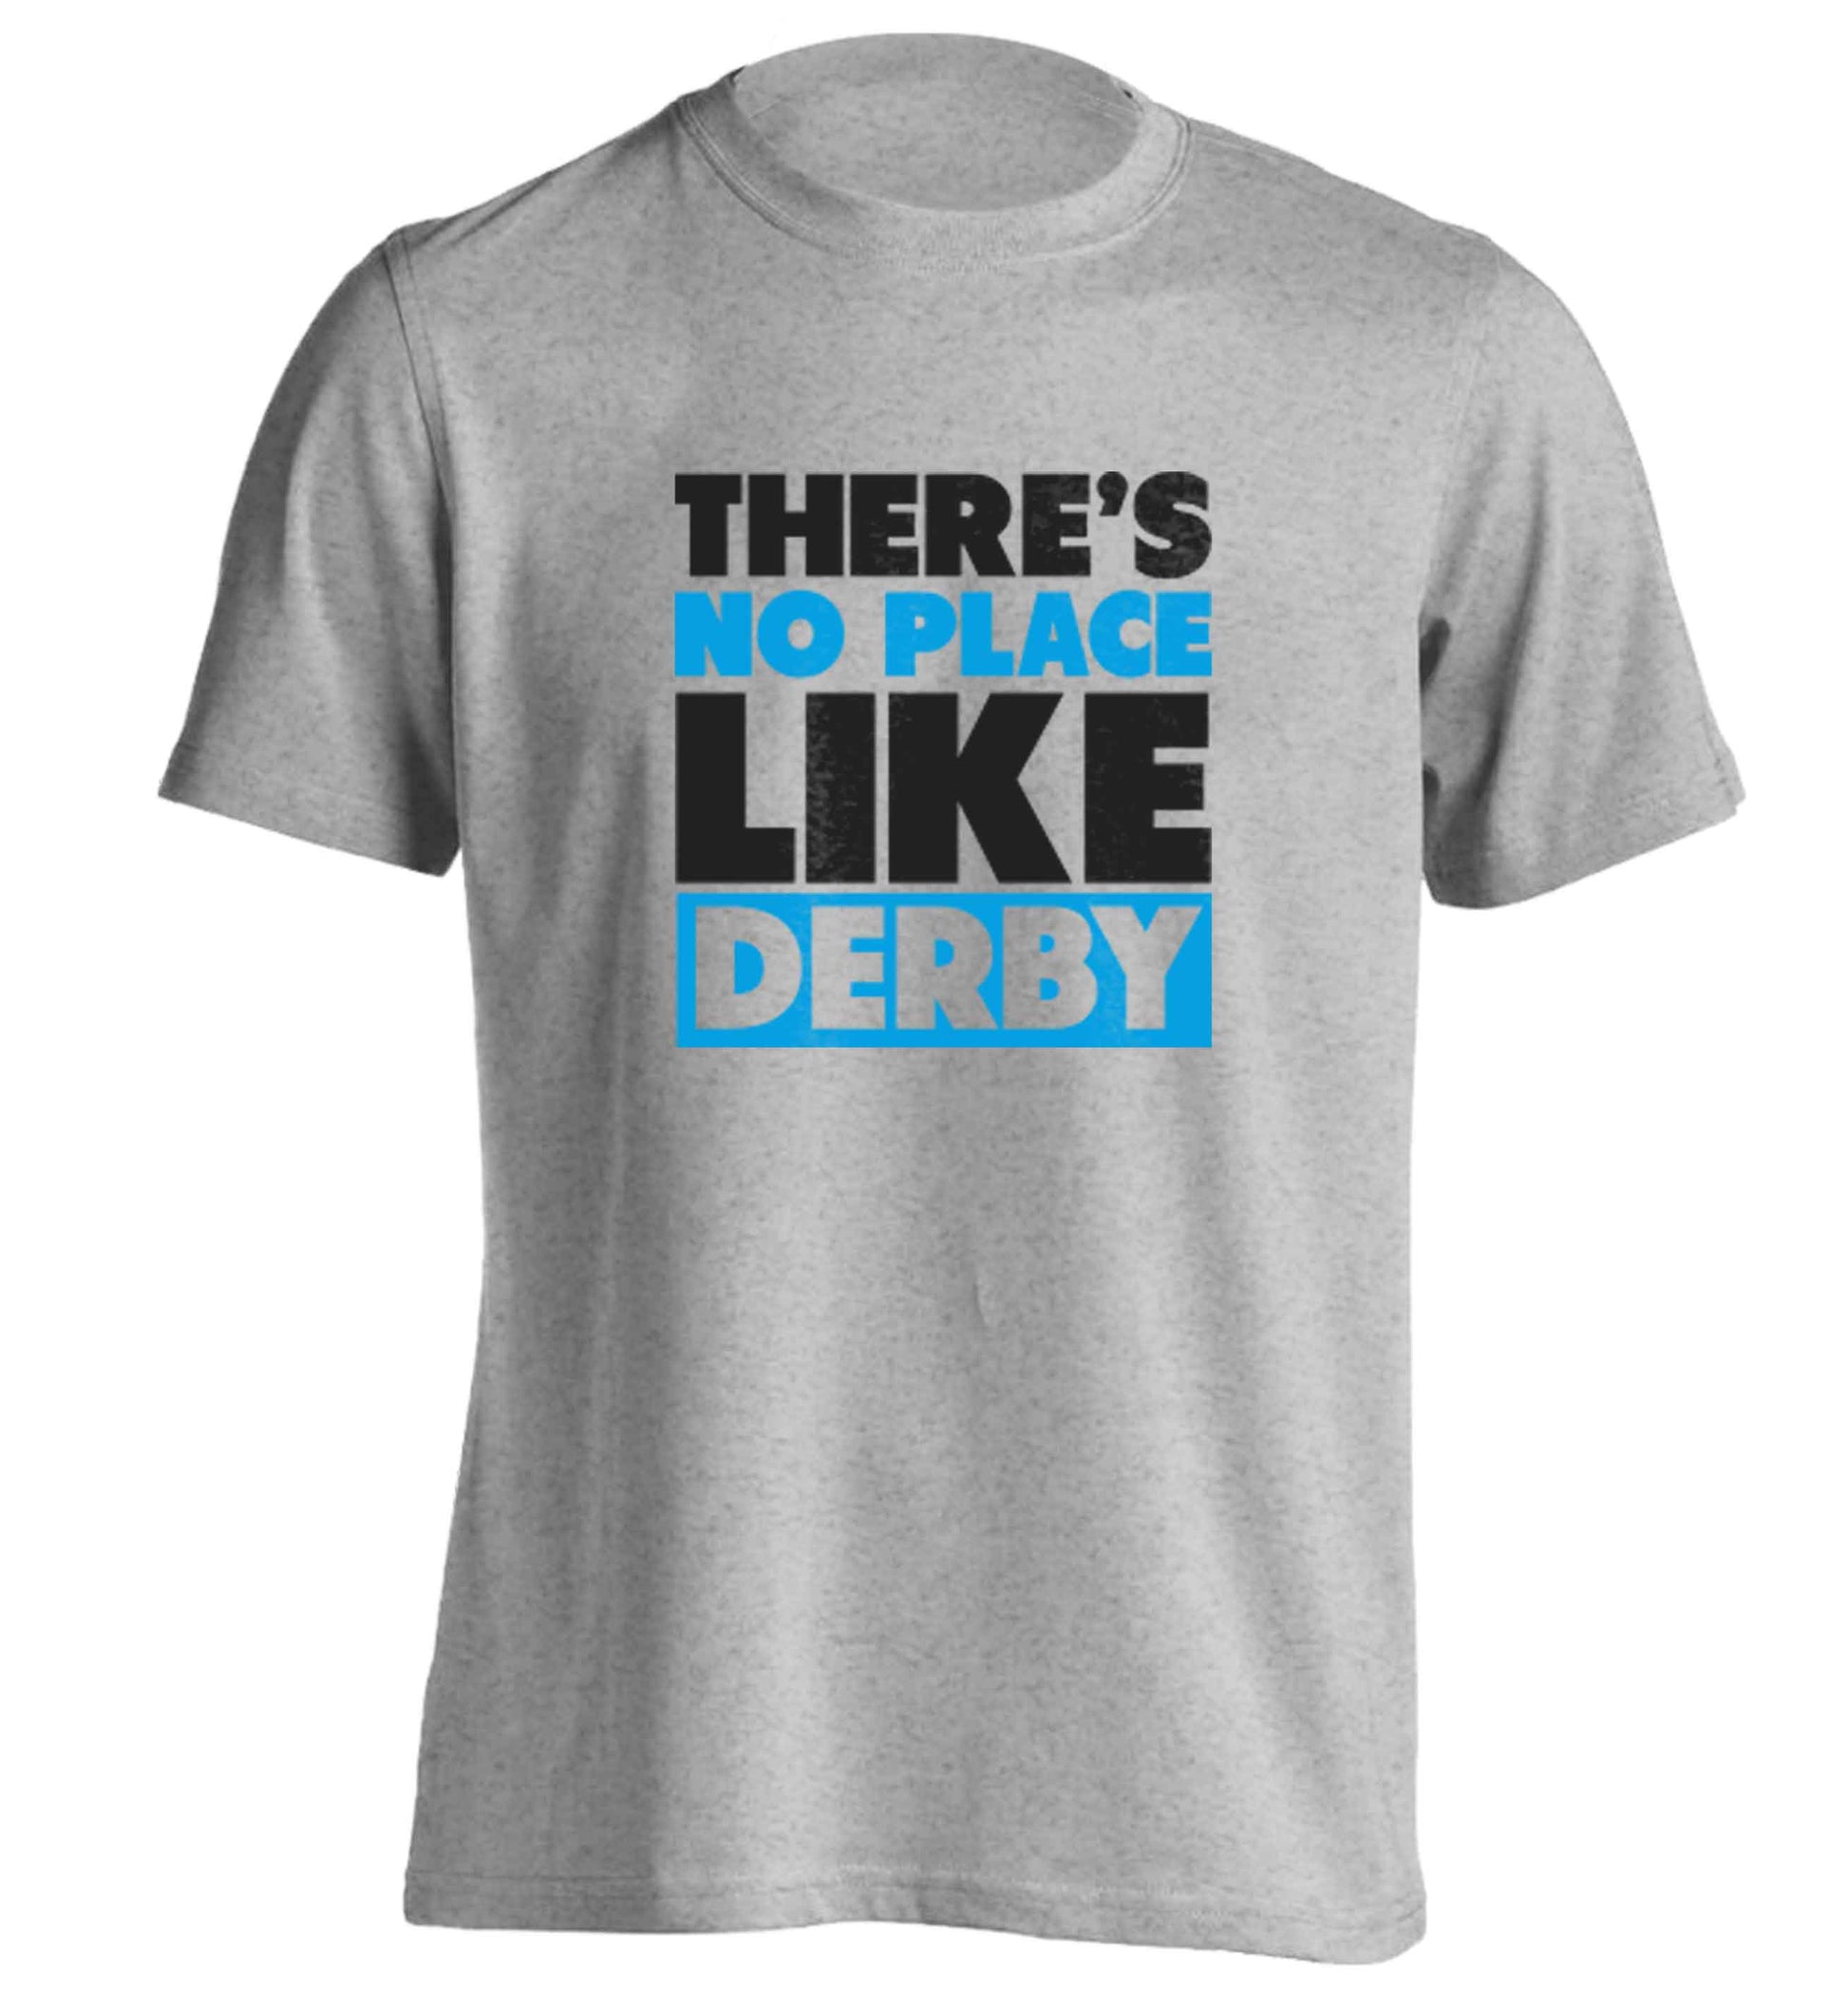 There's no place like Derby adults unisex grey Tshirt 2XL